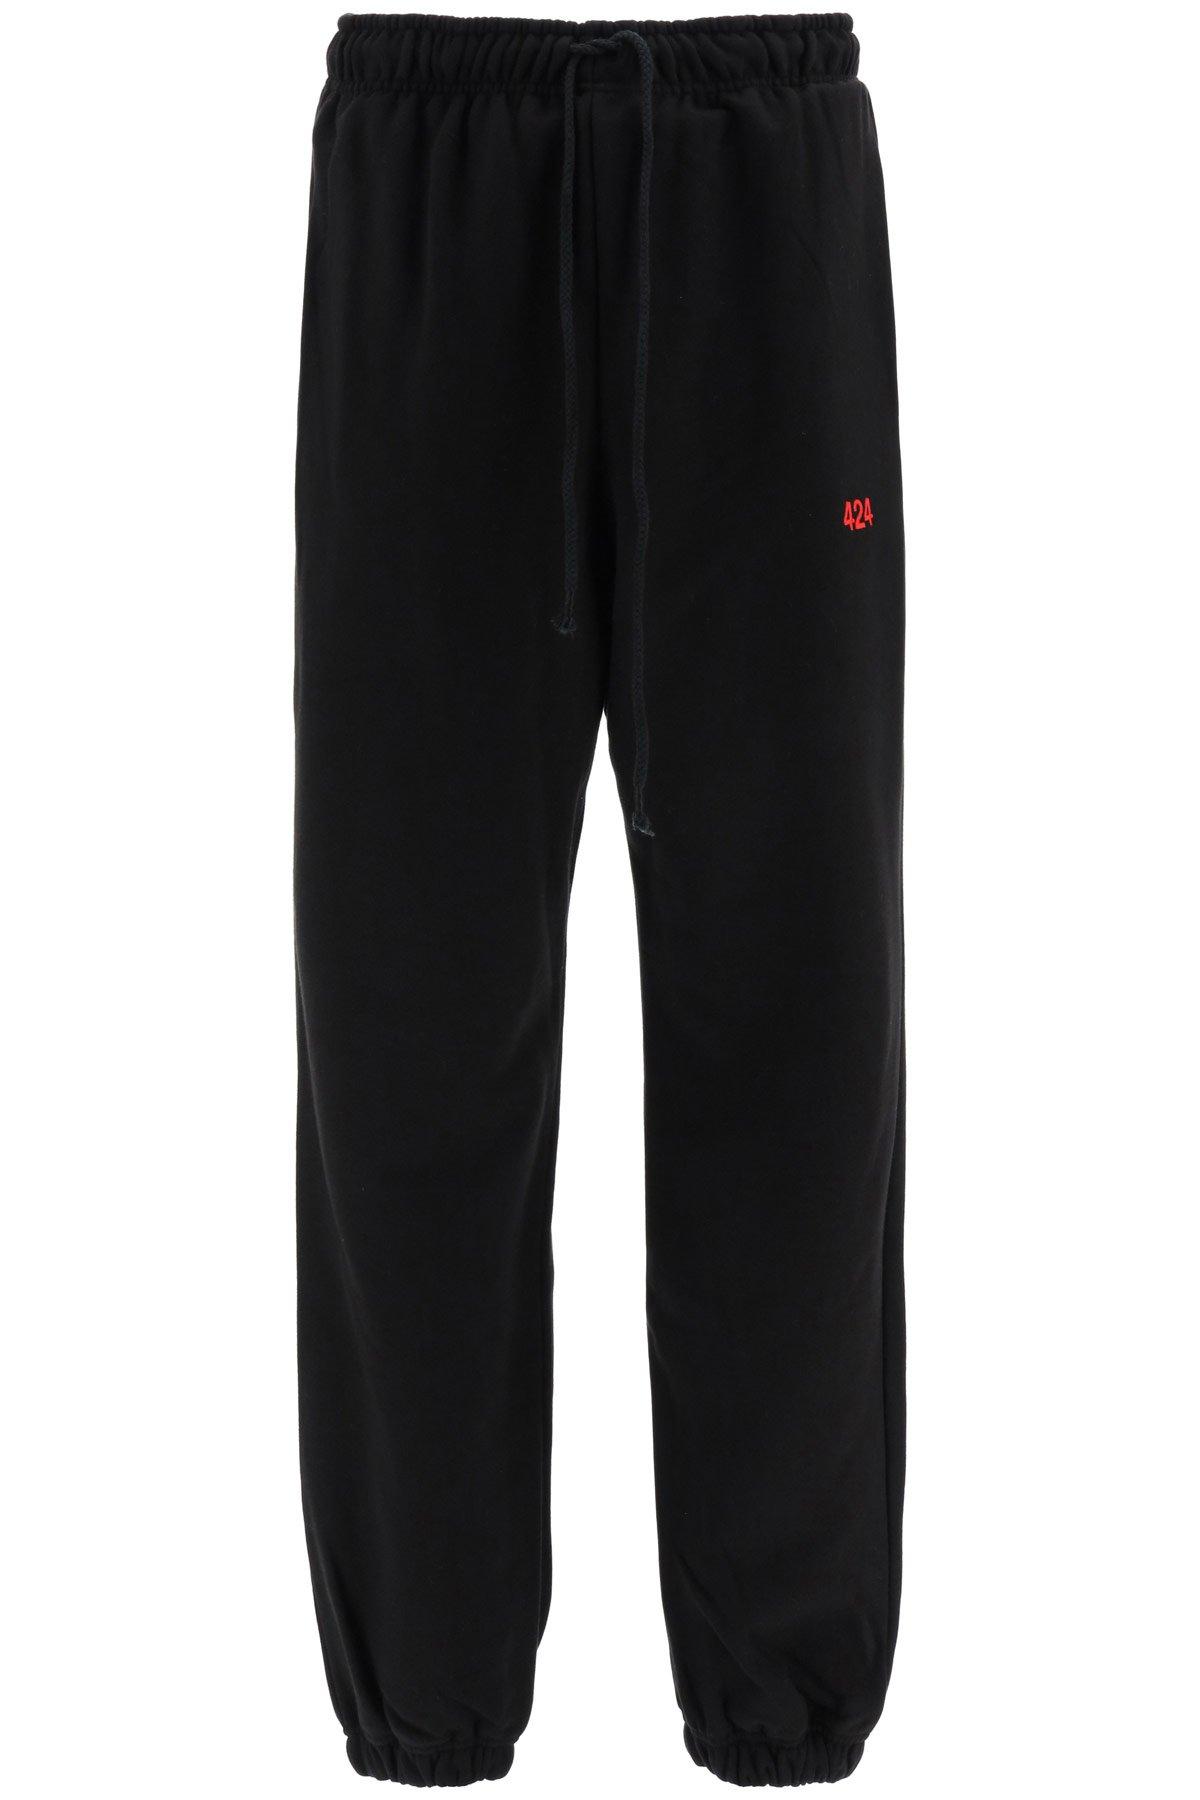 424 Fleece Sweatpants With Logo Embroidery in Black for Men - Save 3% ...